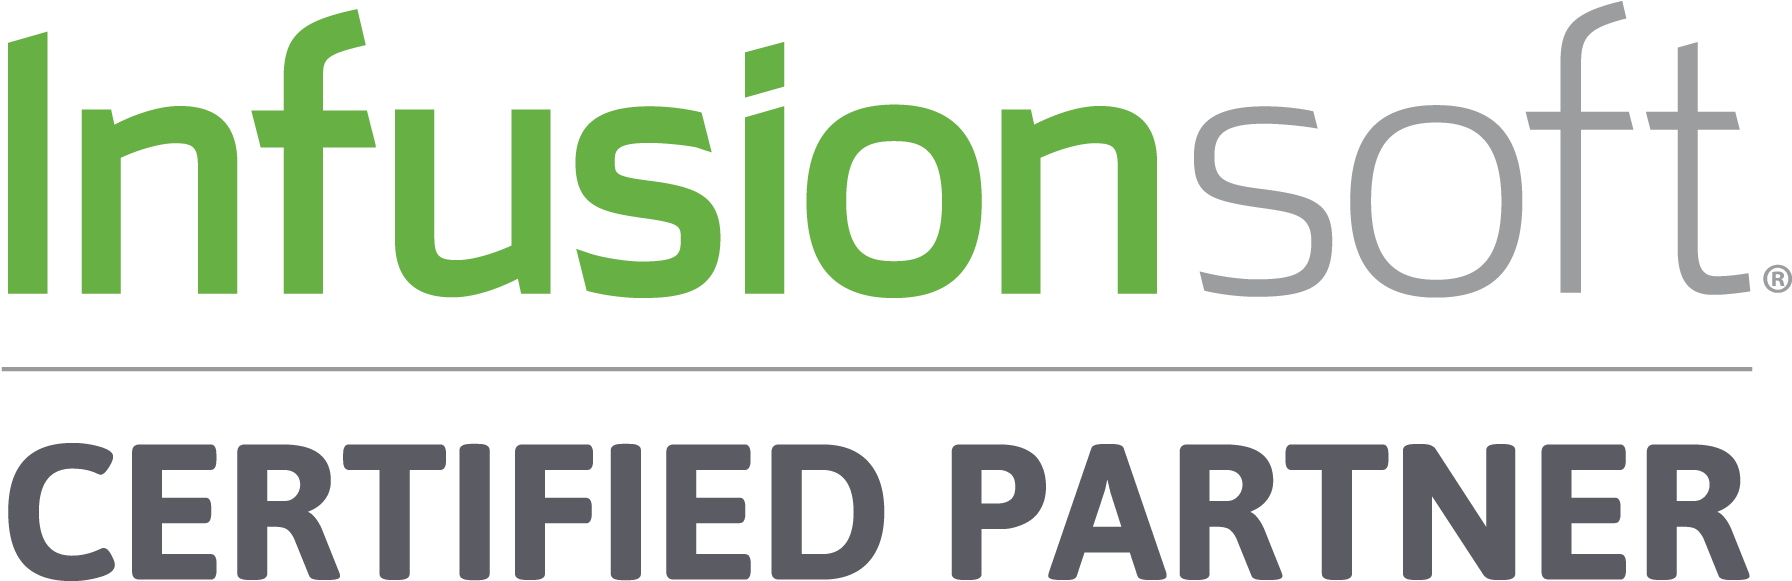 Daniel Bussius Infusionsoft Certified Partner - Infusionsoft Certified Partner (1815x580), Png Download